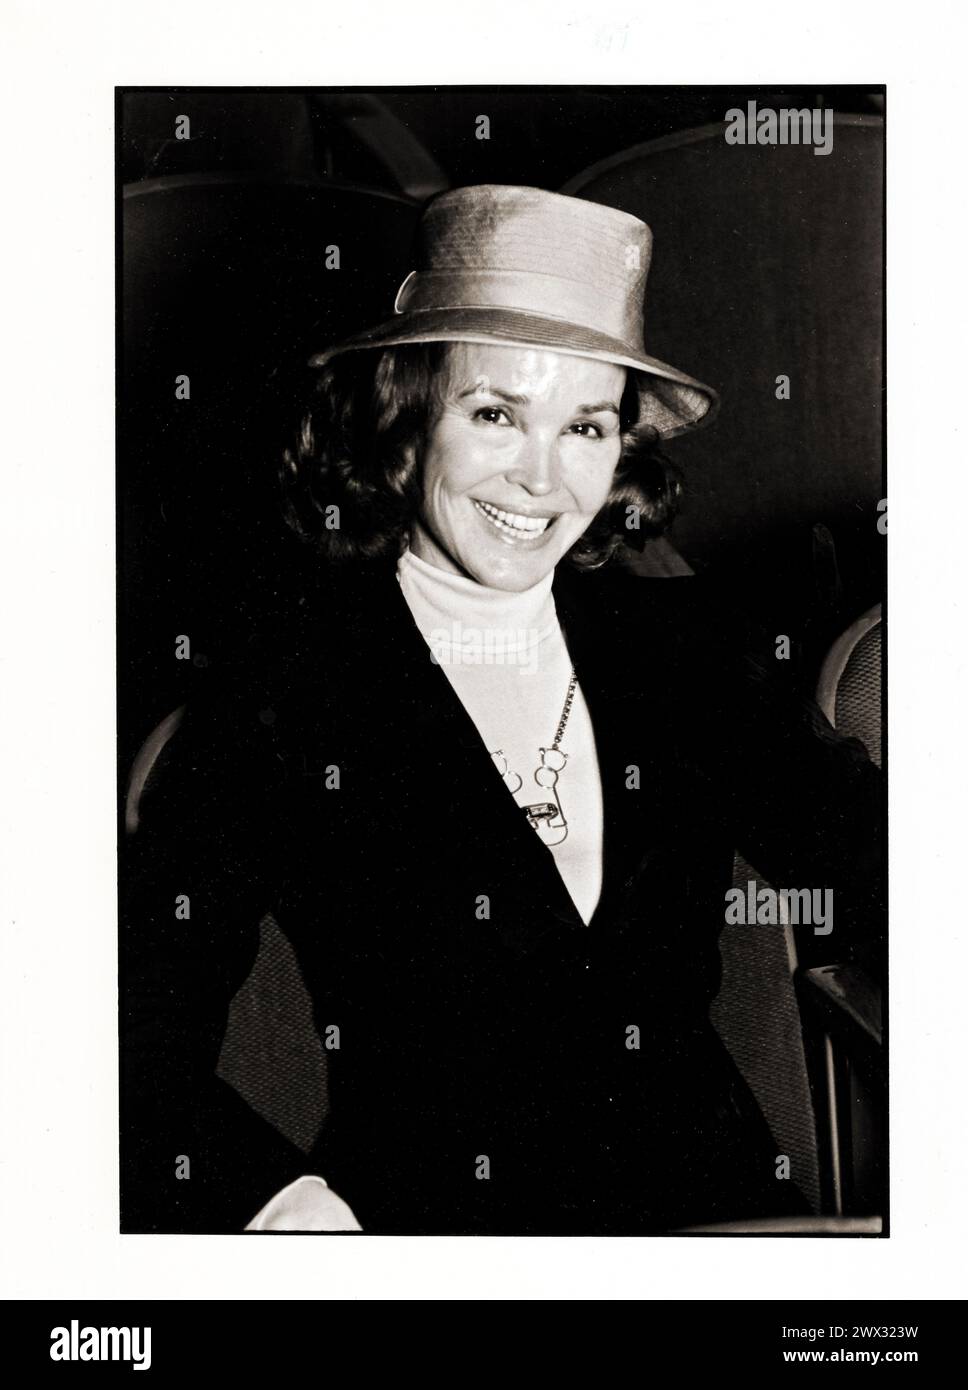 A posed portrait of Kathryn Crosby who was Bing Crosby's second wife. At a theater in Birmingham, Michigan where she was performing in a play. She was wearing Bing's hat. She performed in films under the stage names Kathryn Grant and Kathryn Grandstaff. Circa 1978. Stock Photo